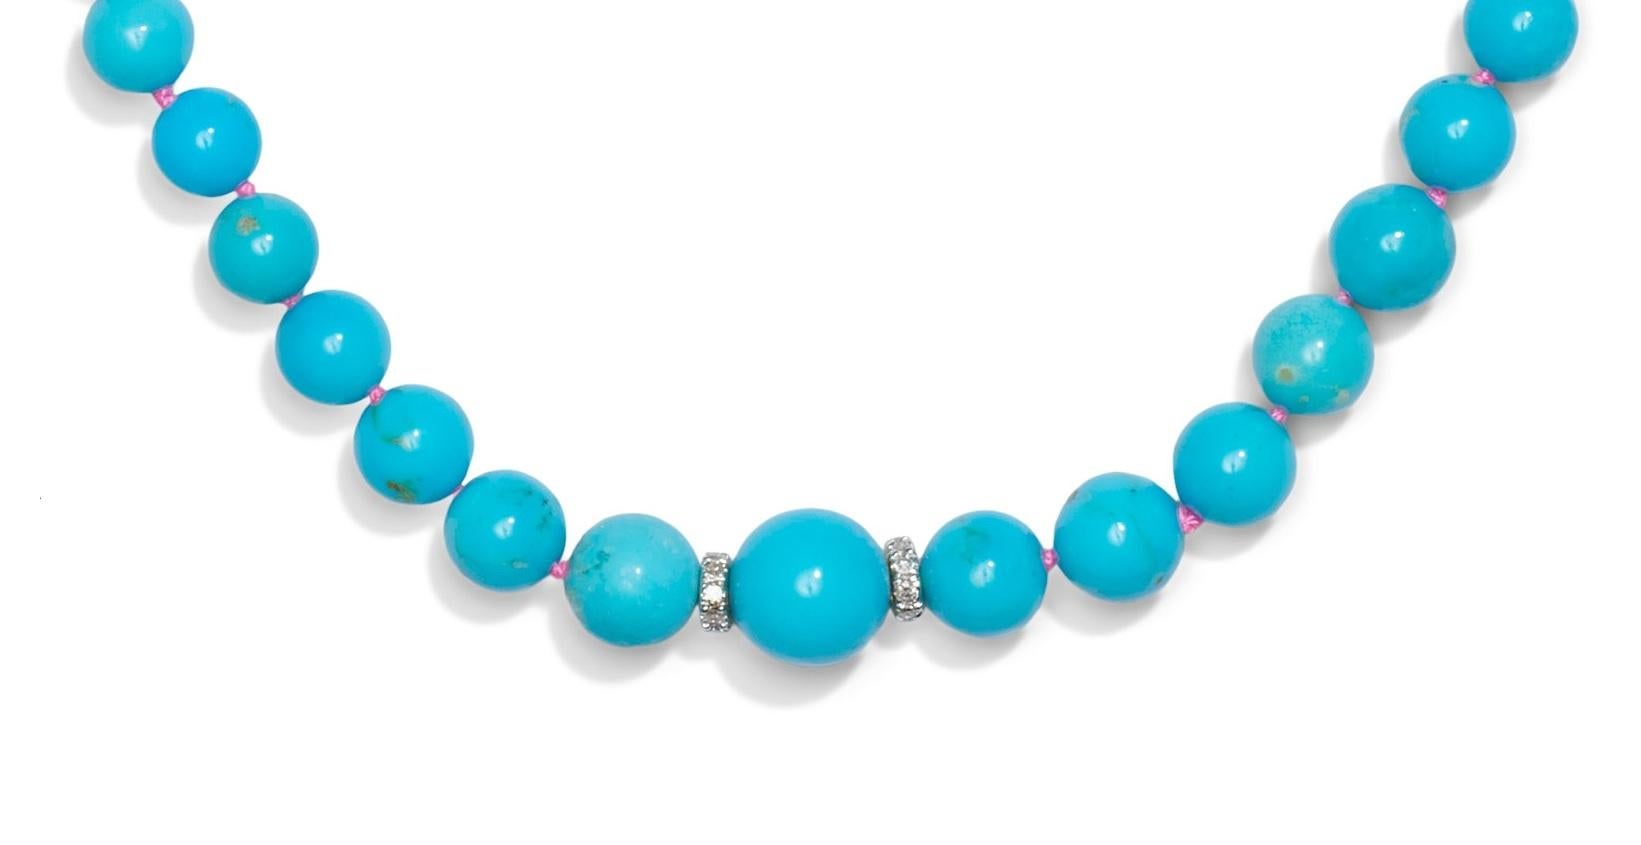 alluring round sky blue turquoise beads, hand-knotted on luxurious silk and dazzlingly framed with white sparkling diamonds — all cinched together with a regal 14k gold clasp! This necklace is composed of pure natural Sleeping Beuty